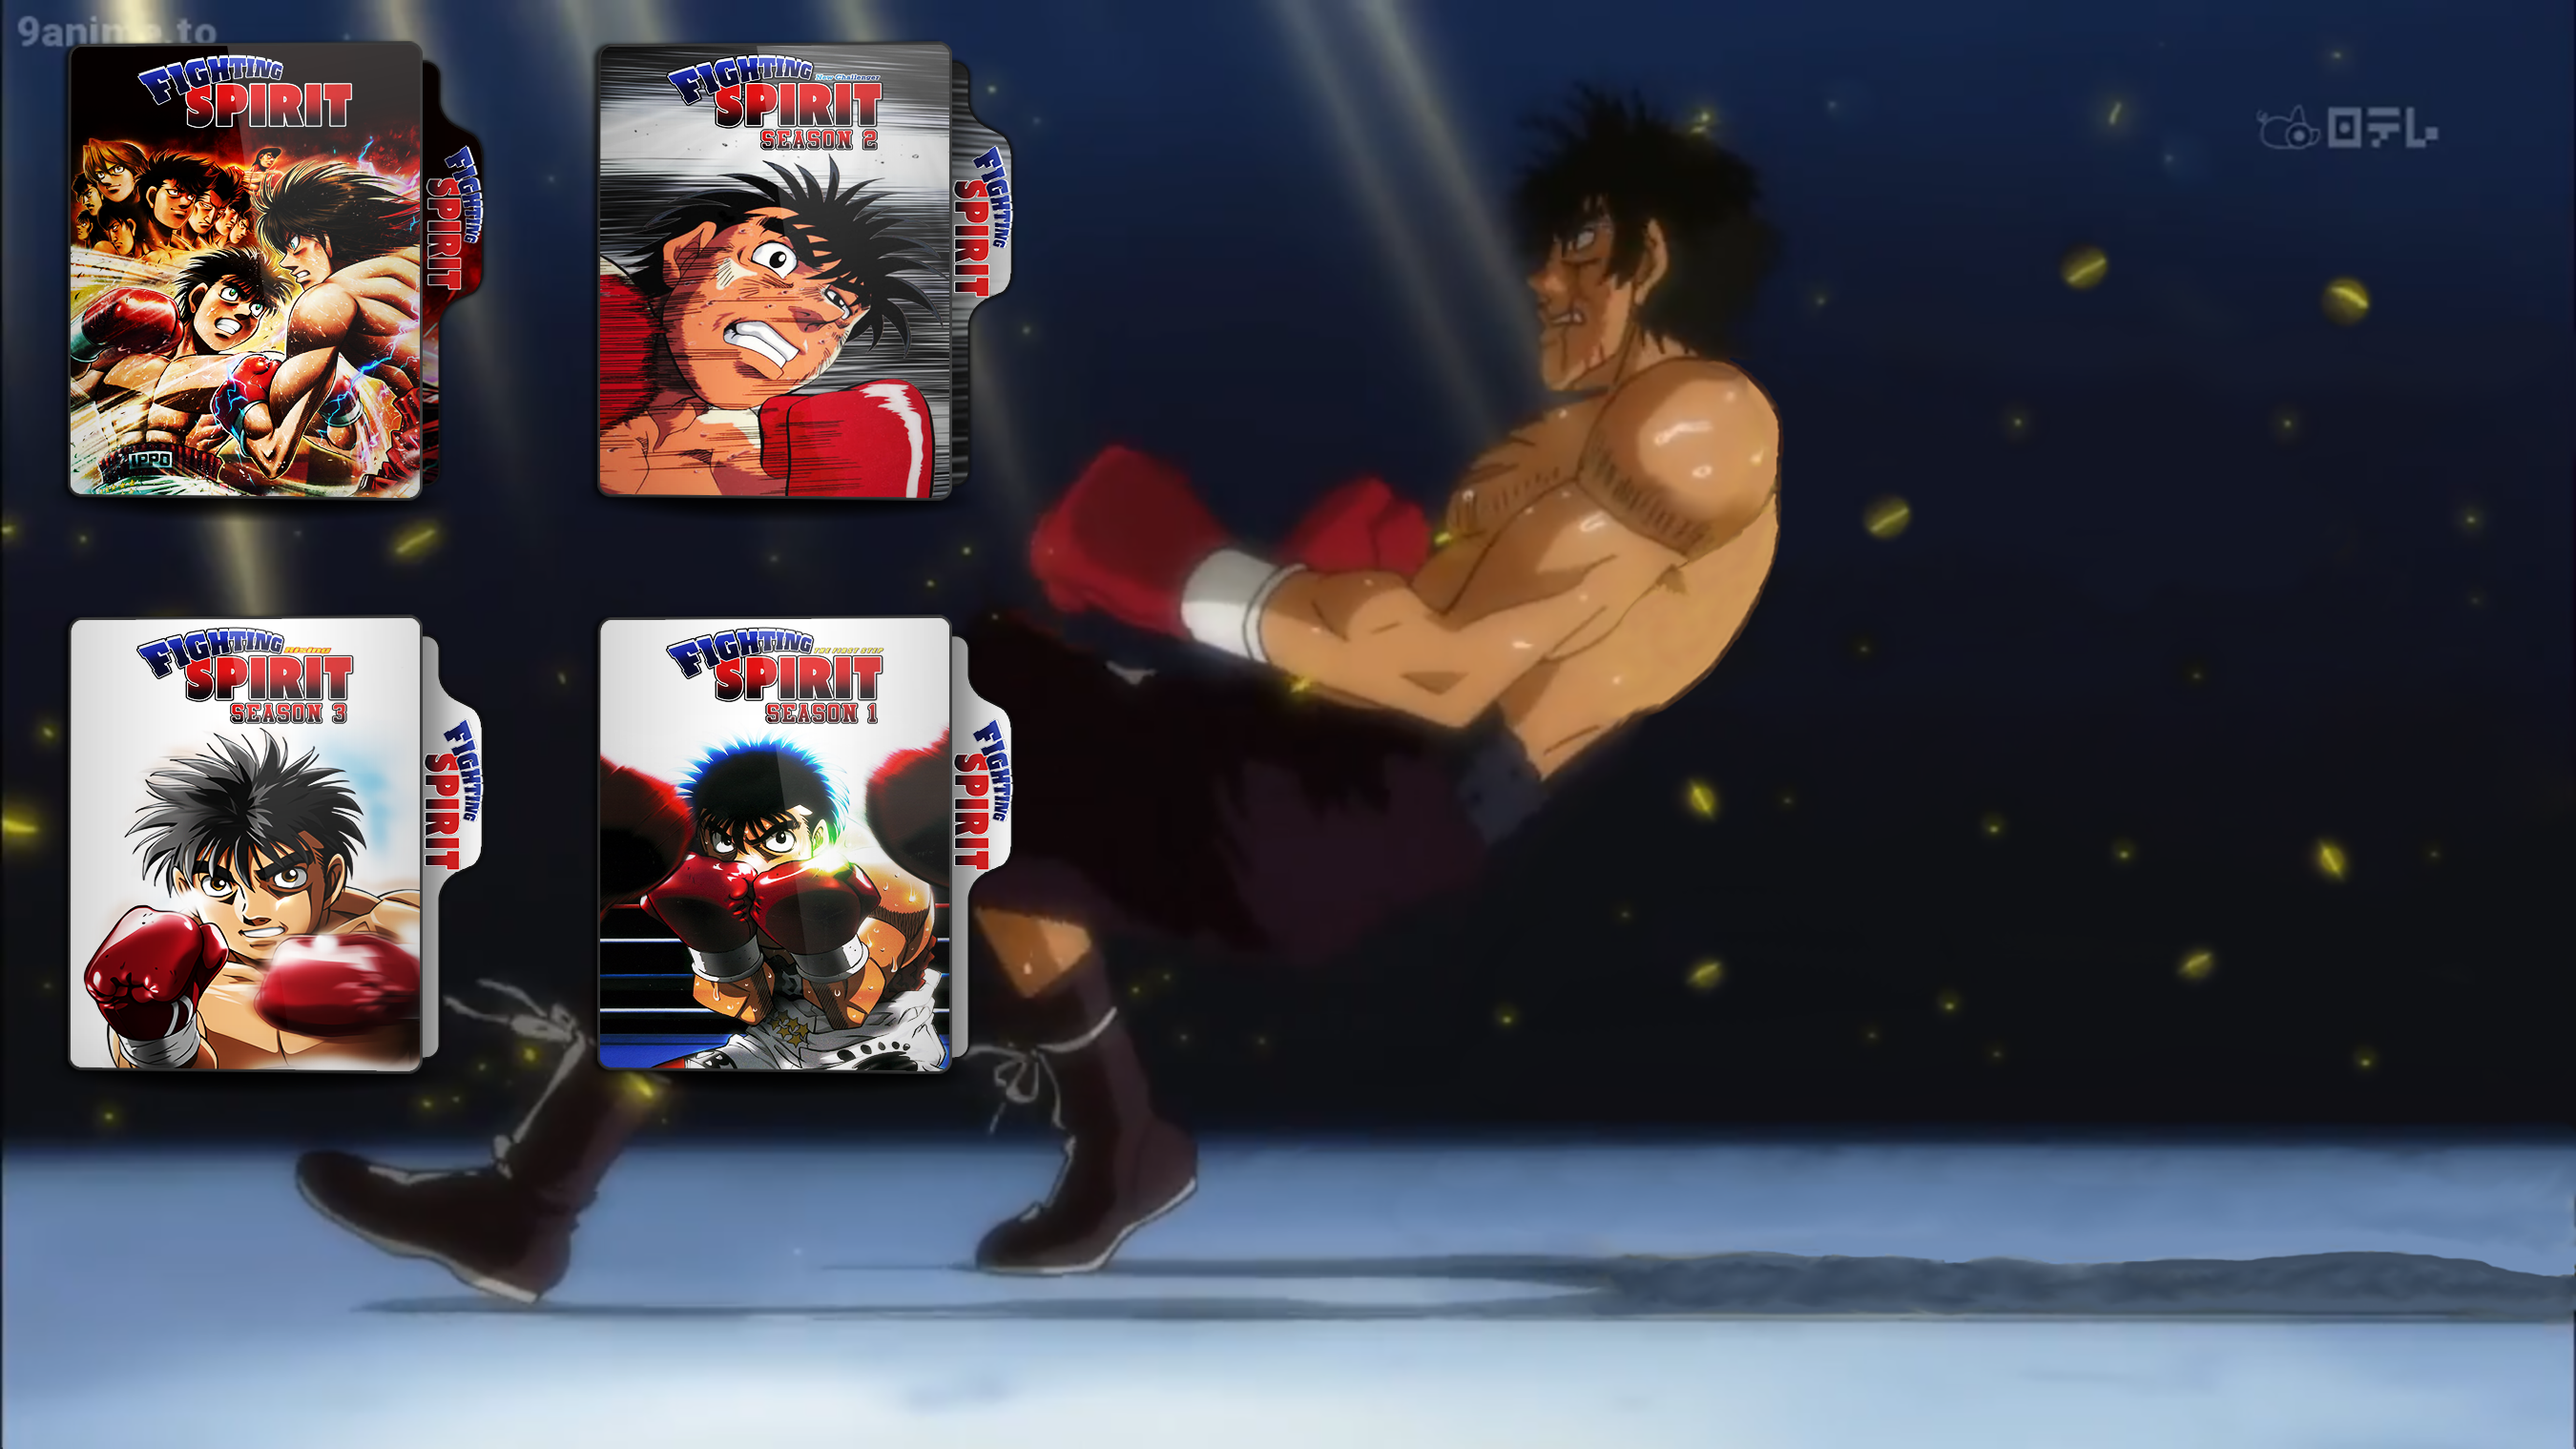 spoiler] I made a app icons for ippo vs sendo (Sorry if the flair is  wrong,I am not sure which one to choose) : r/hajimenoippo